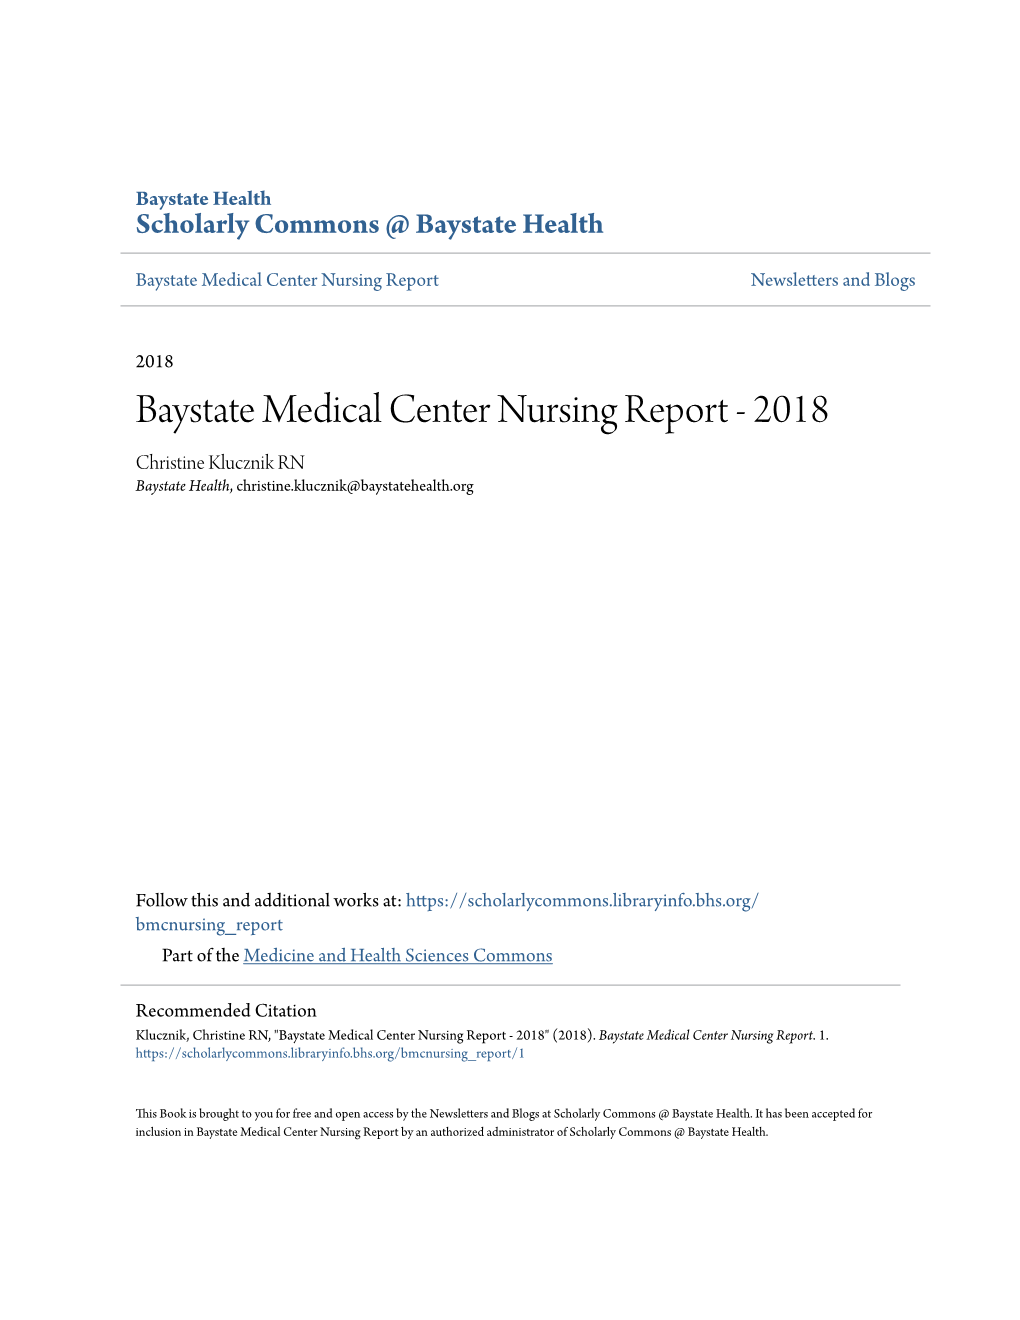 Baystate Medical Center Nursing Report Newsletters and Blogs